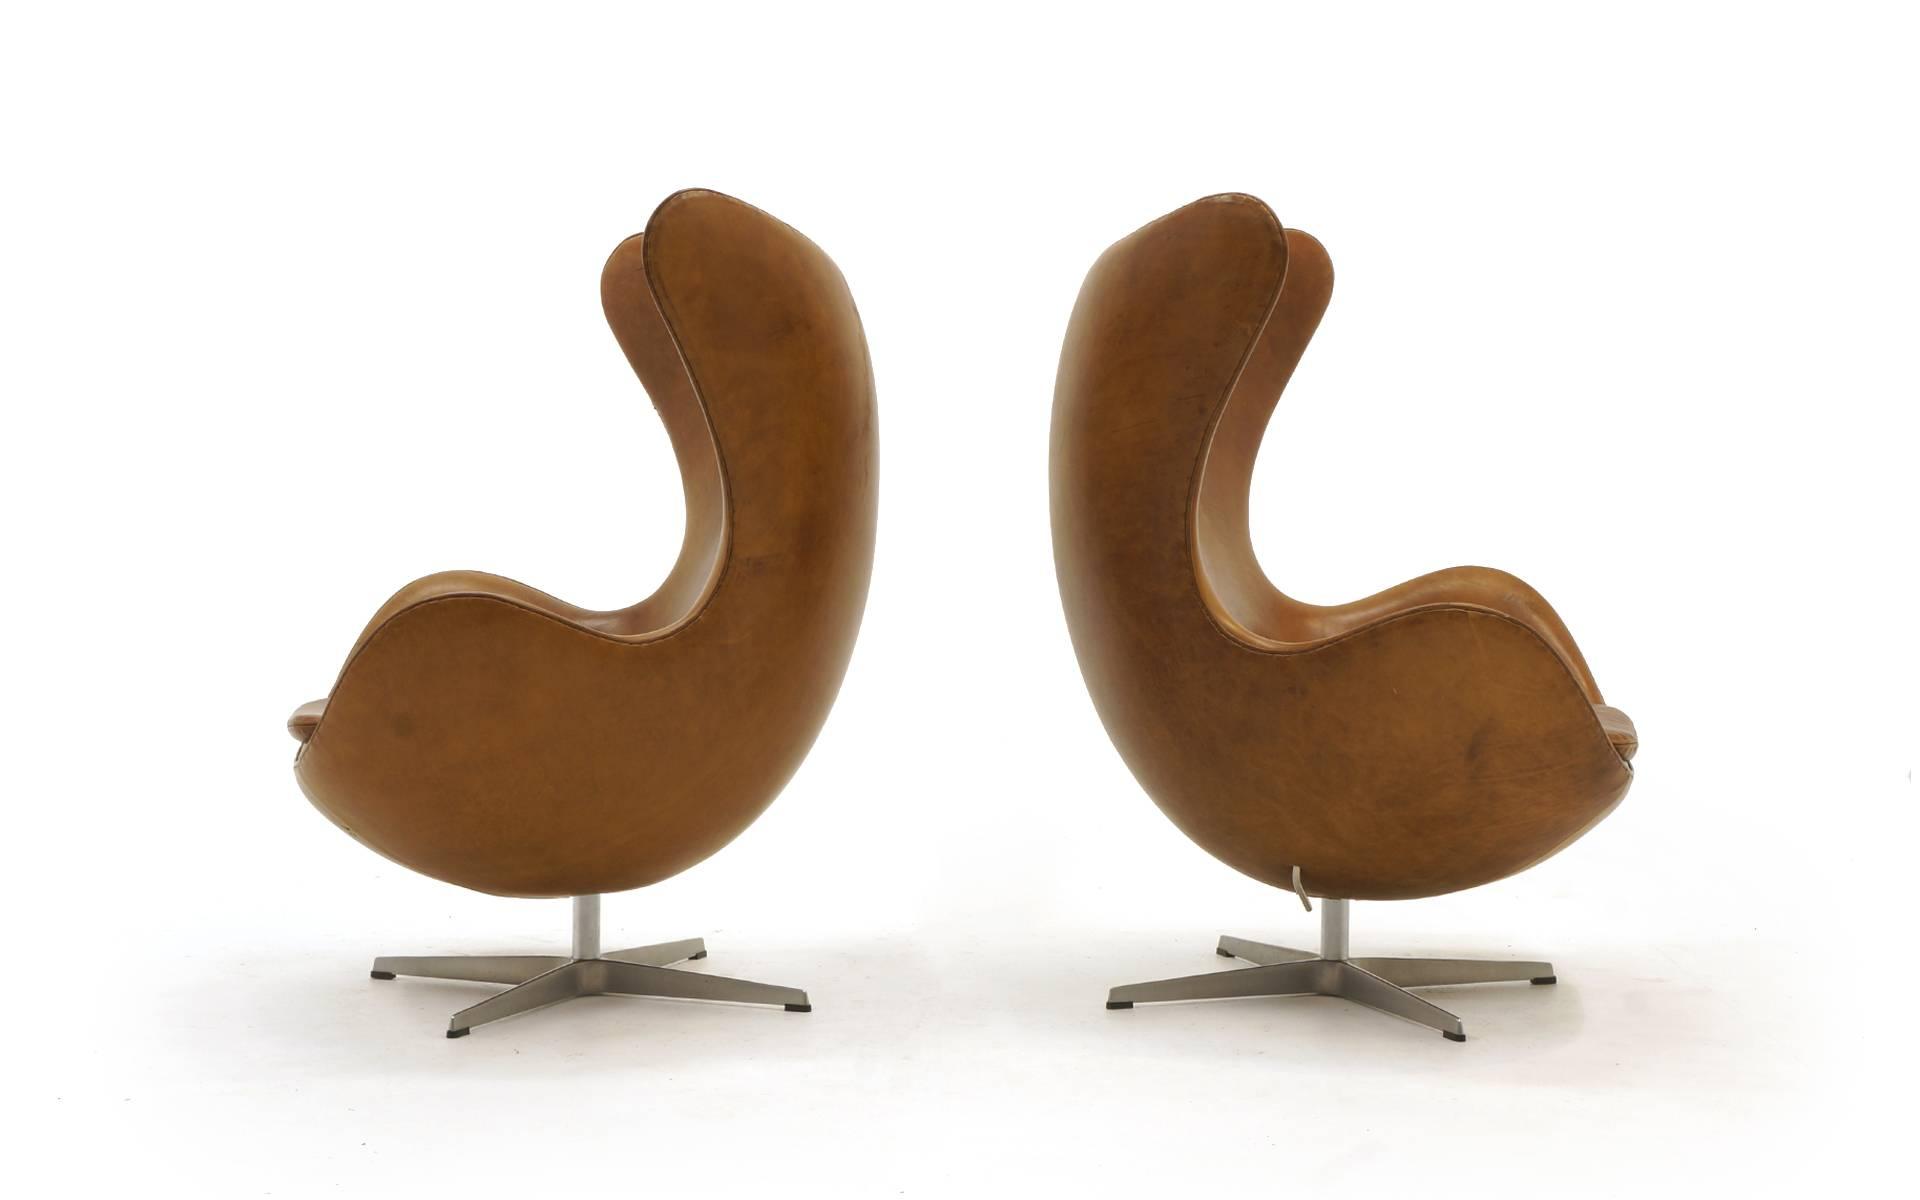 Scandinavian Modern Pair of Arne Jacobsen Egg Chairs in Cognac / Tan  Leather, Made by